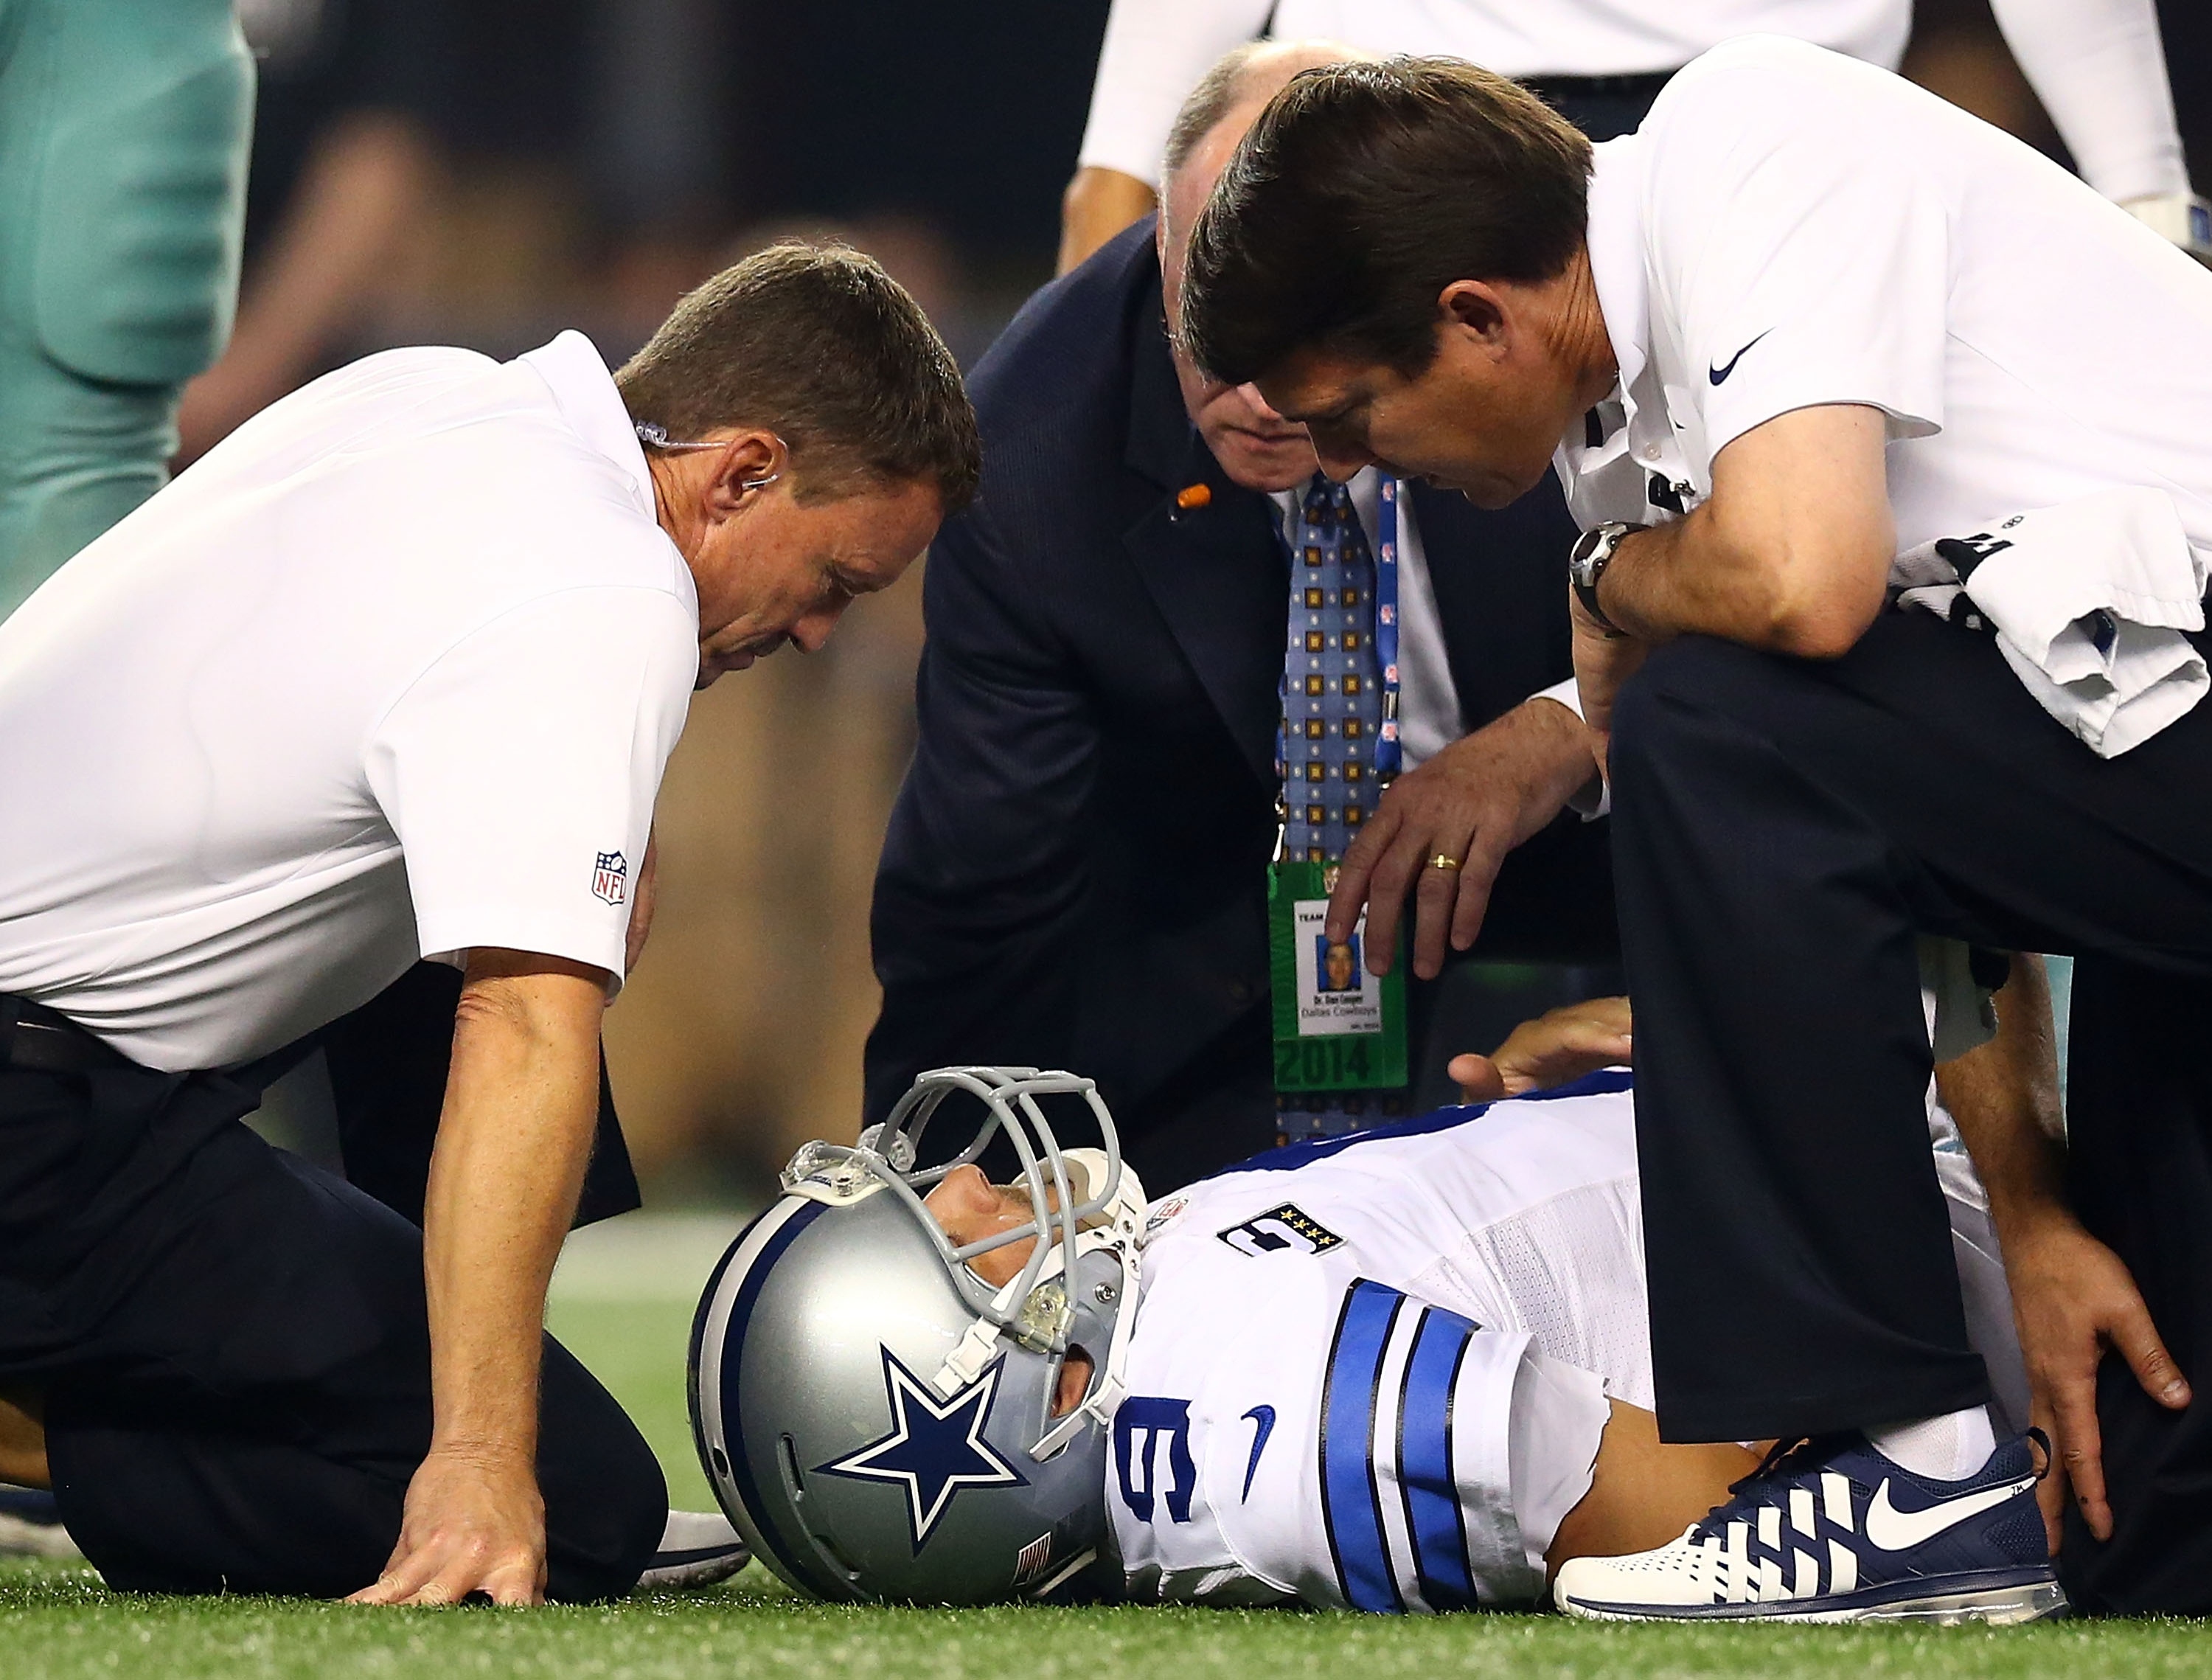 ARLINGTON, TX - OCTOBER 27: Tony Romo #9 of the Dallas Cowboys is attended to by team personnel after being sacked by Keenan Robinson #52 of the Washington Redskins during the second half at AT&T Stadium on October 27, 2014 in Arlington, Texas. (Photo by Ronald Martinez/Getty Images)